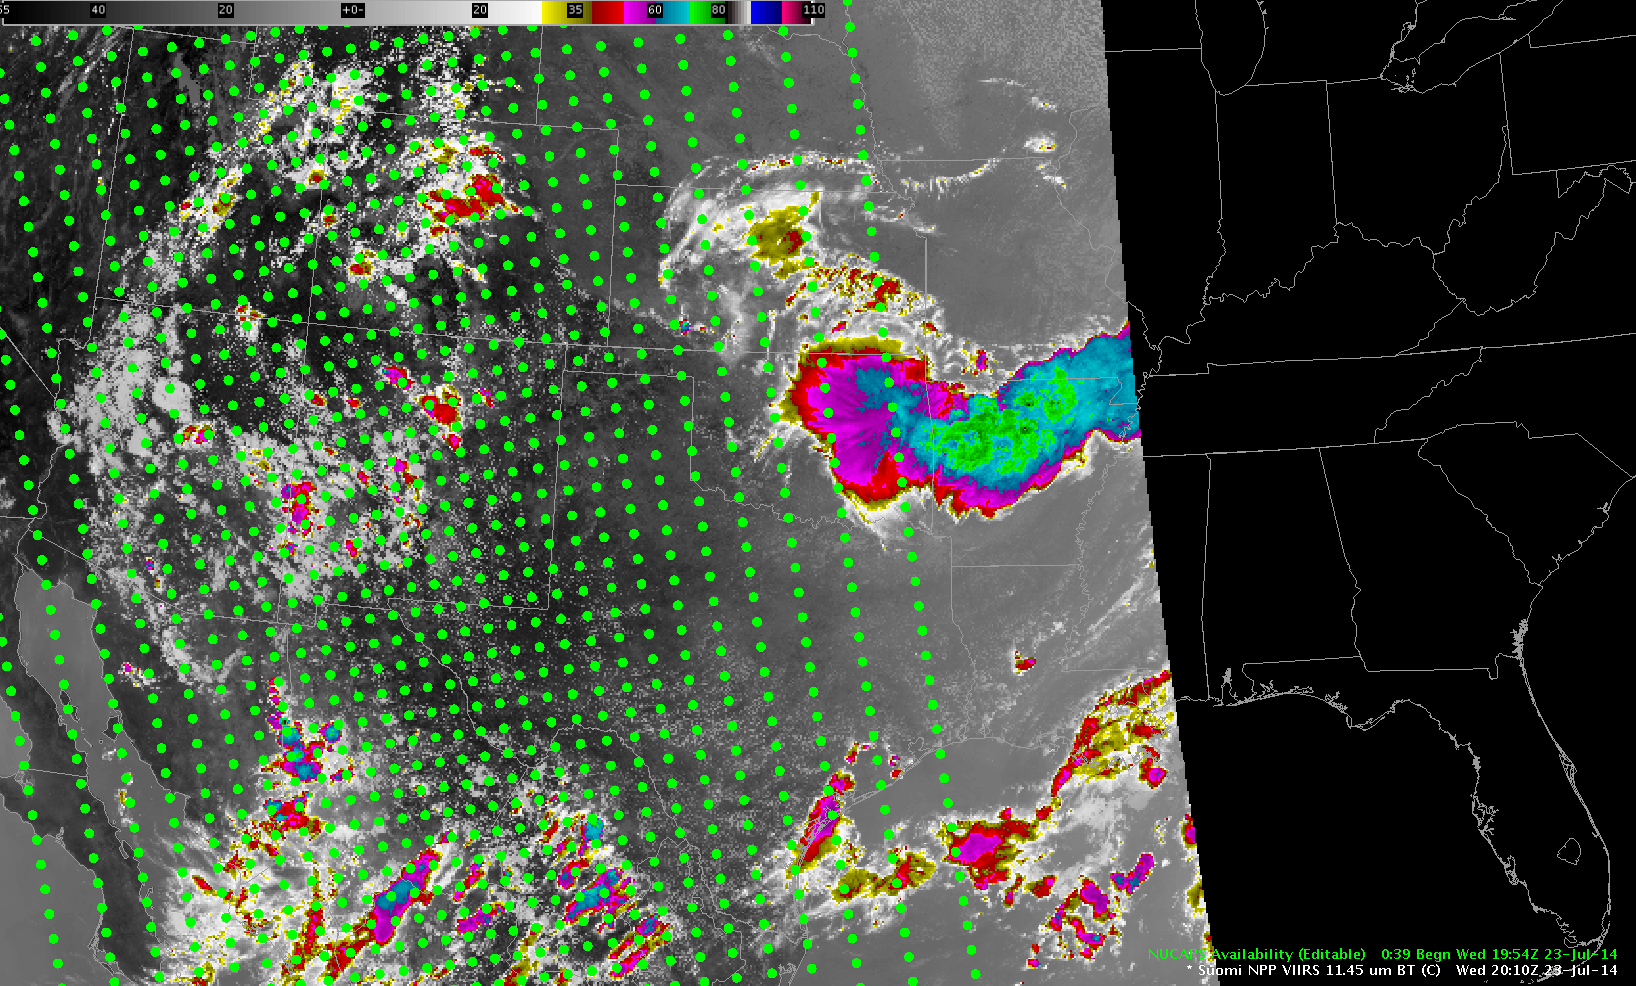 Suomi NPP VIIRS 11.35 µm Imagery at 2010 UTC, with NUCAPS Sounding Locations in Green (Click to enlarge)